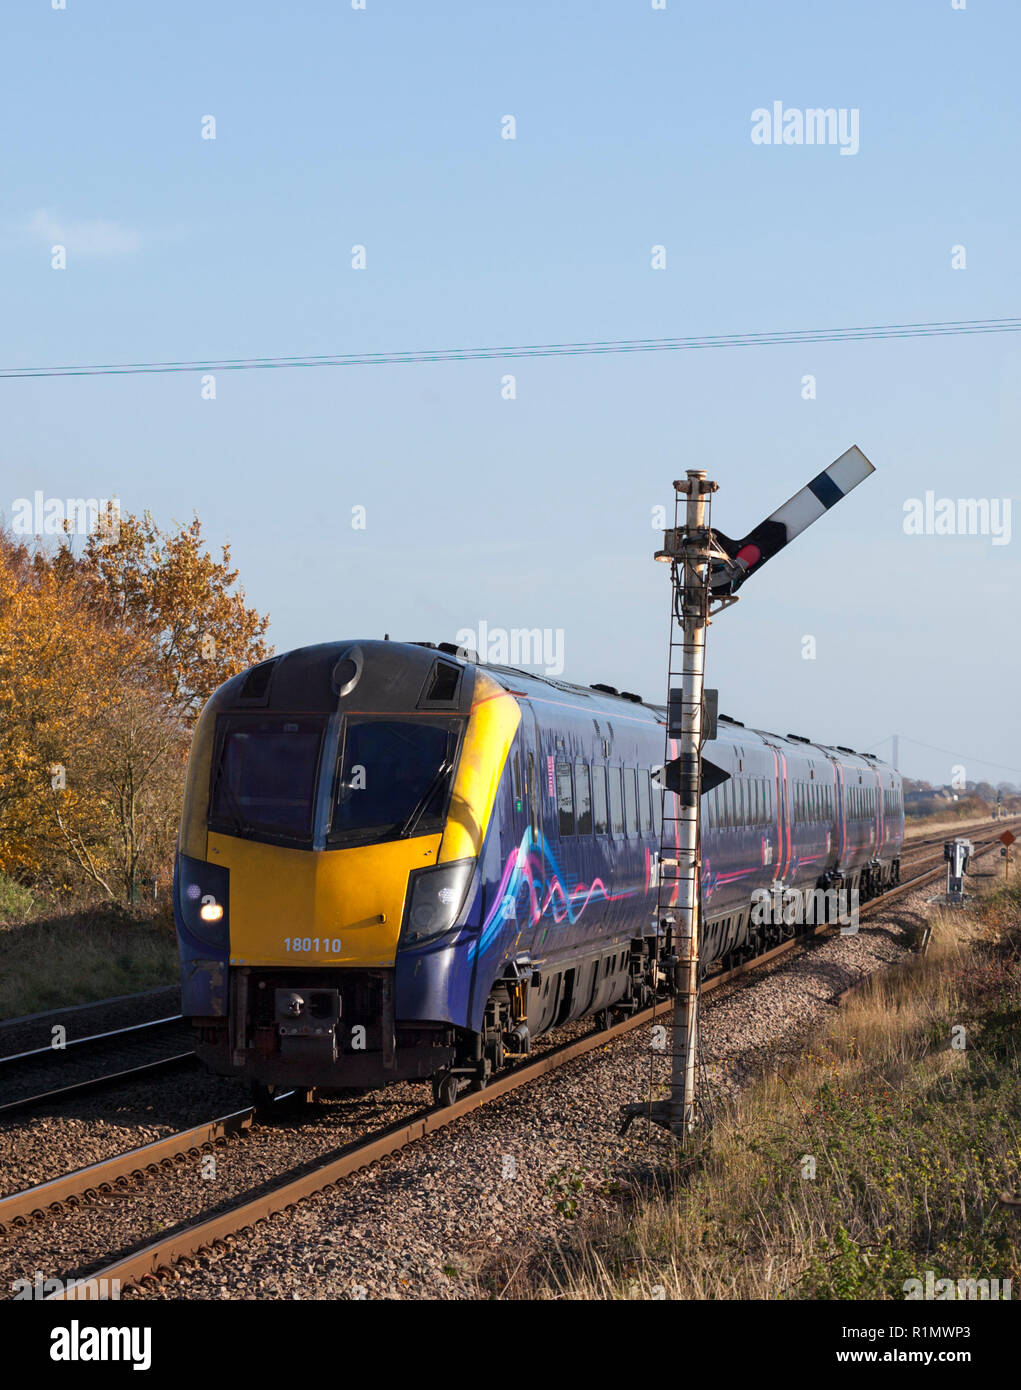 A First Hull Trains class 180 DMU train passing Crabley Creek on the line to Hull while running empty from Hull - Doncaster Stock Photo